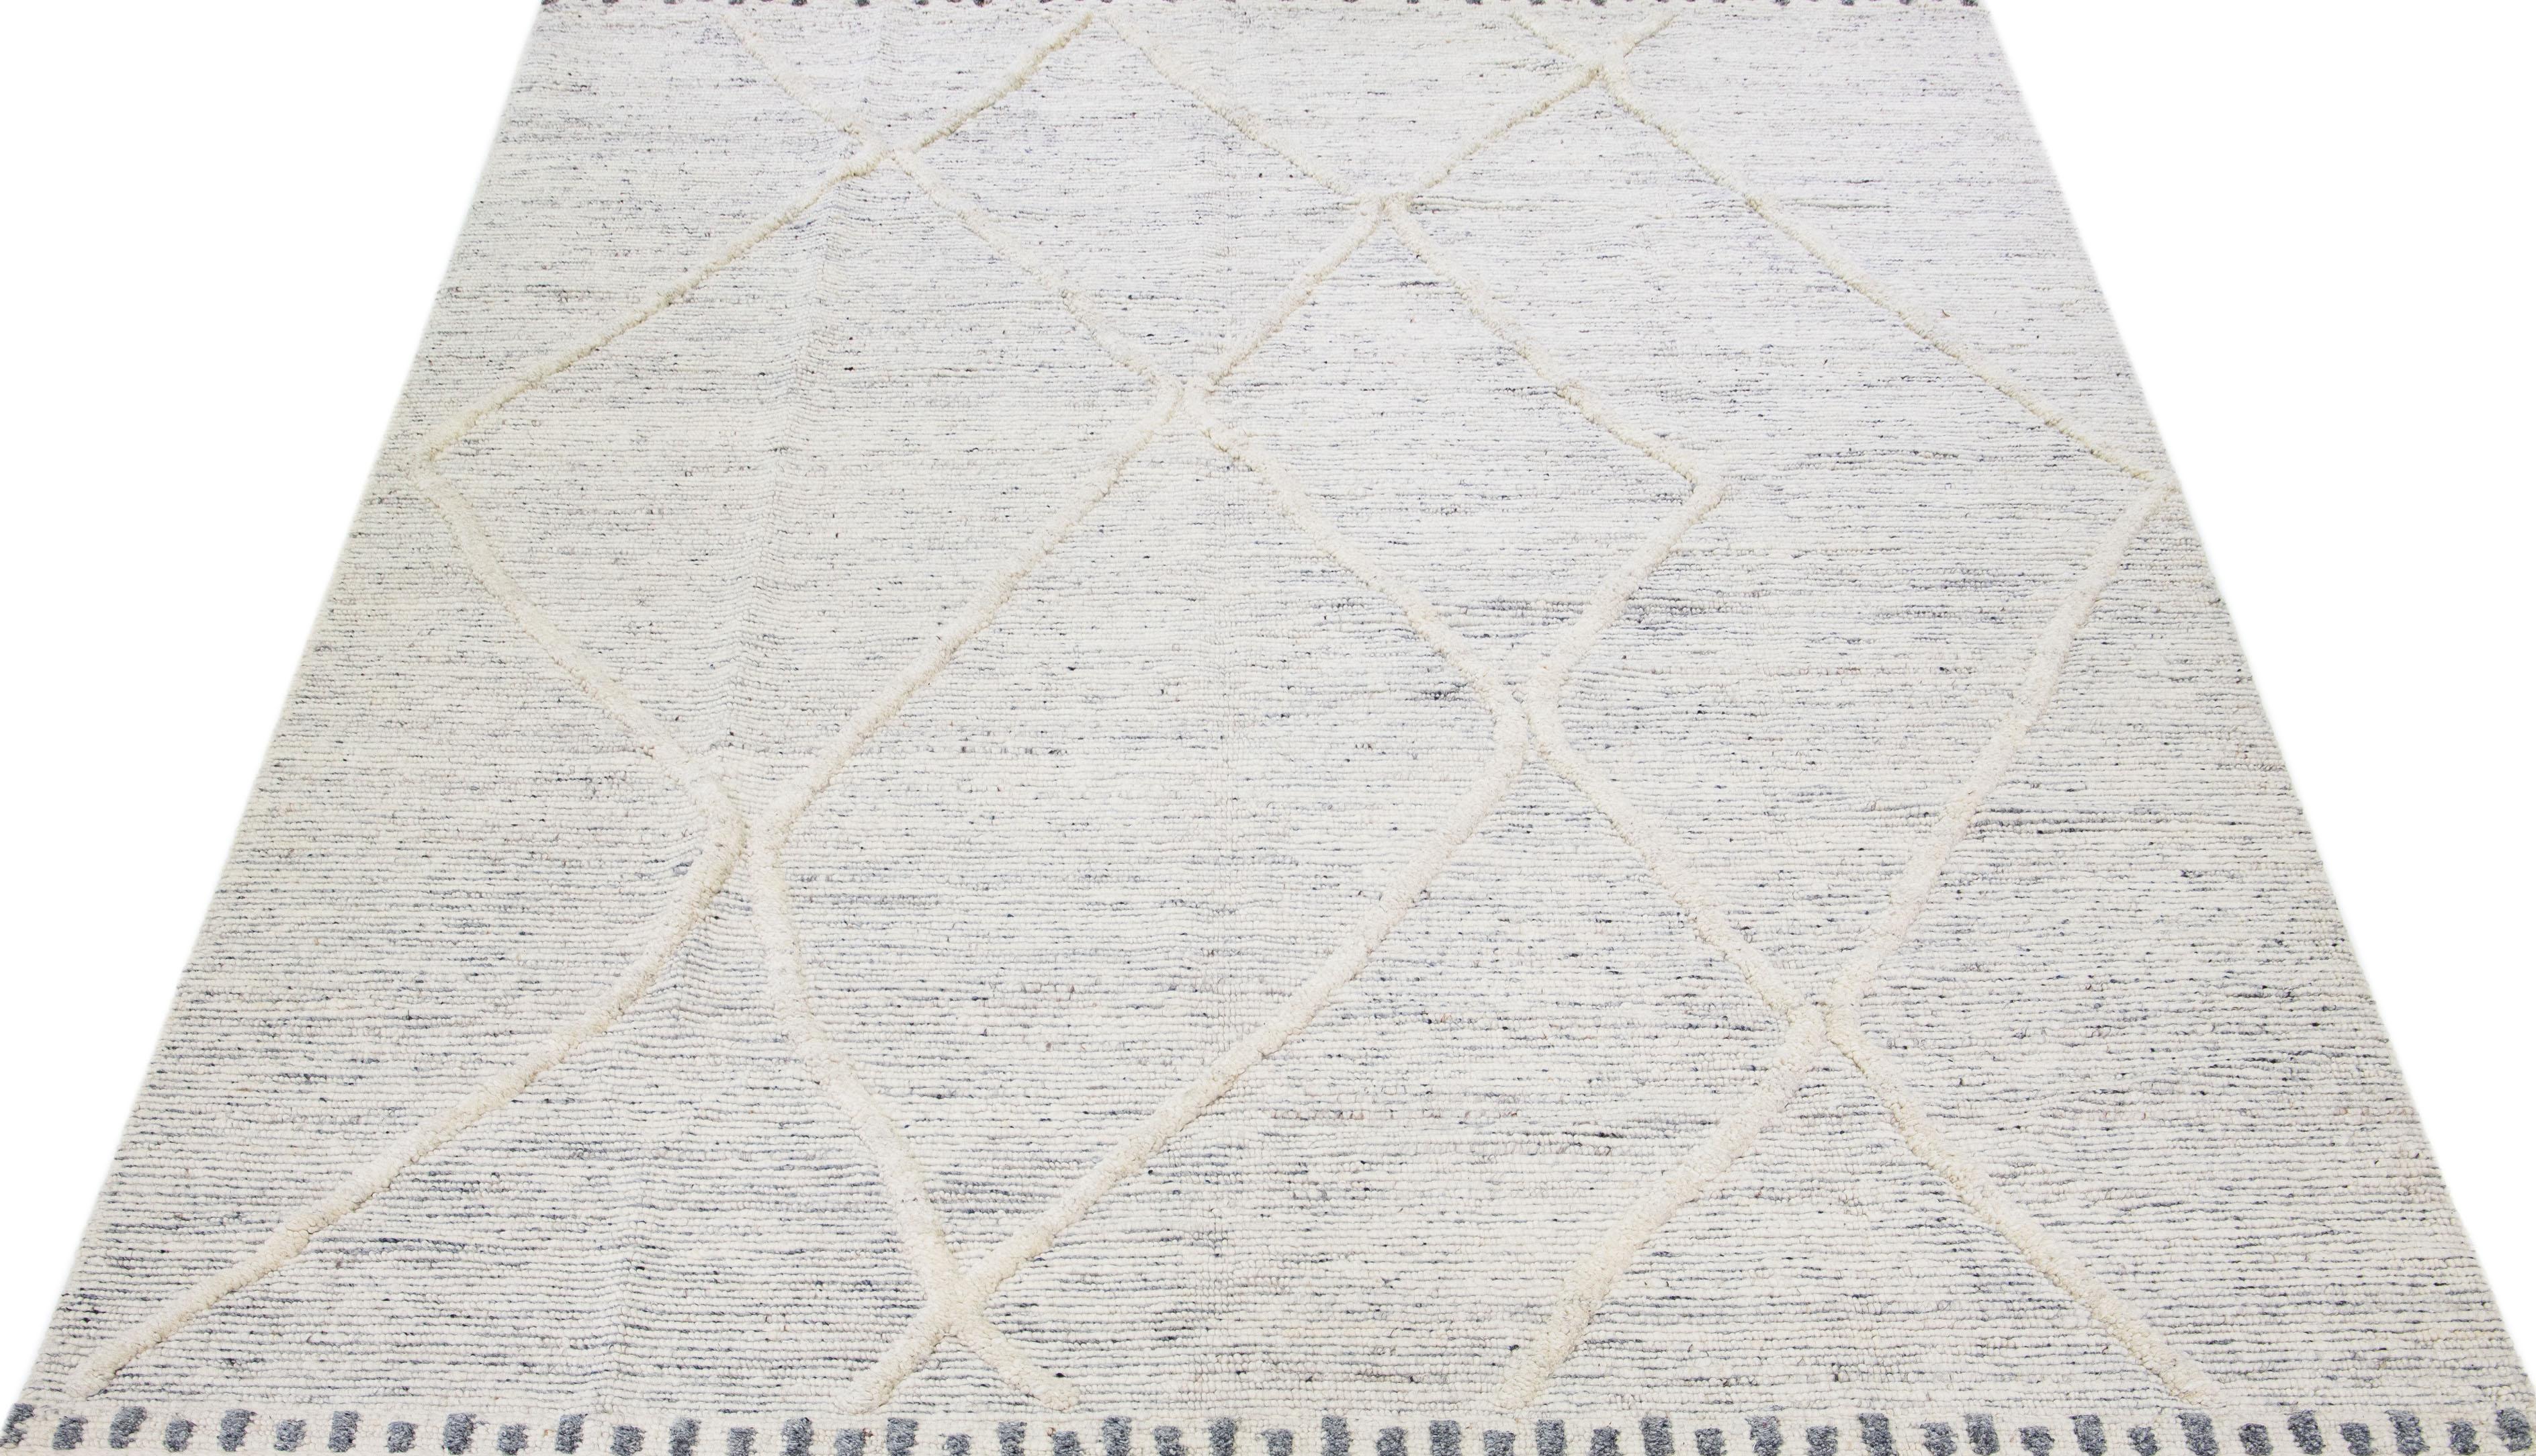 Beautiful Moroccan-style handmade wool rug with an ivory color field. This Modern rug has gray accents featuring a gorgeous all-over geometric boho motif.

This rug measures: 10'2